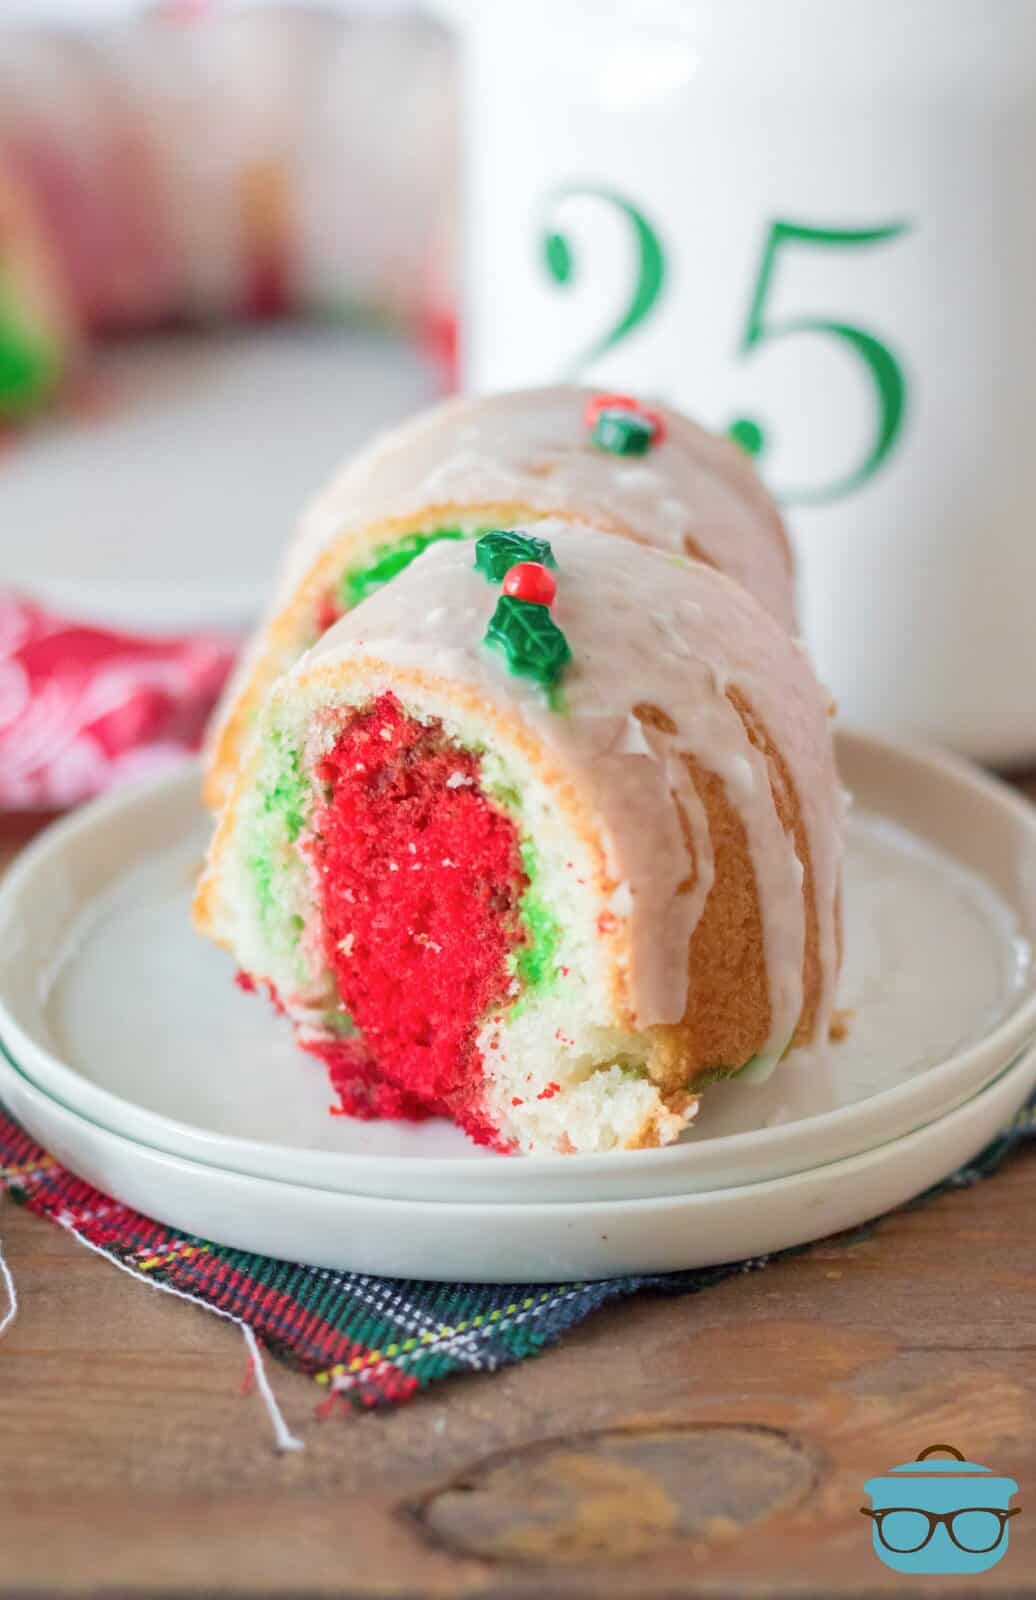 two slices of Christmas bundt cake shown on a white plate so you can see the colorful  red and green inside of the cake.